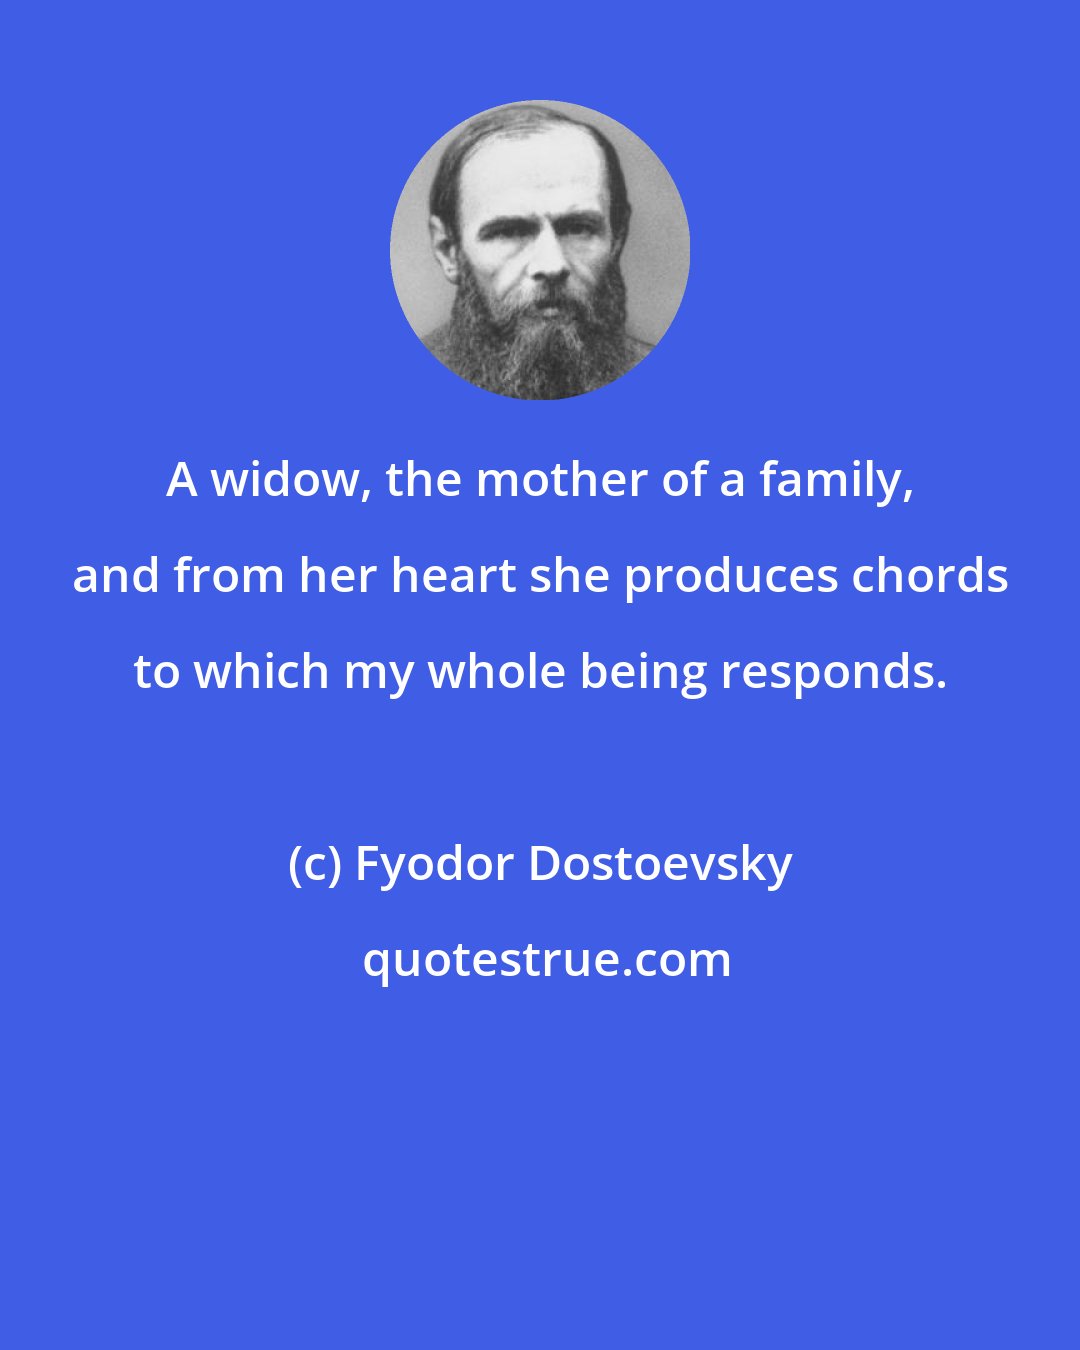 Fyodor Dostoevsky: A widow, the mother of a family, and from her heart she produces chords to which my whole being responds.